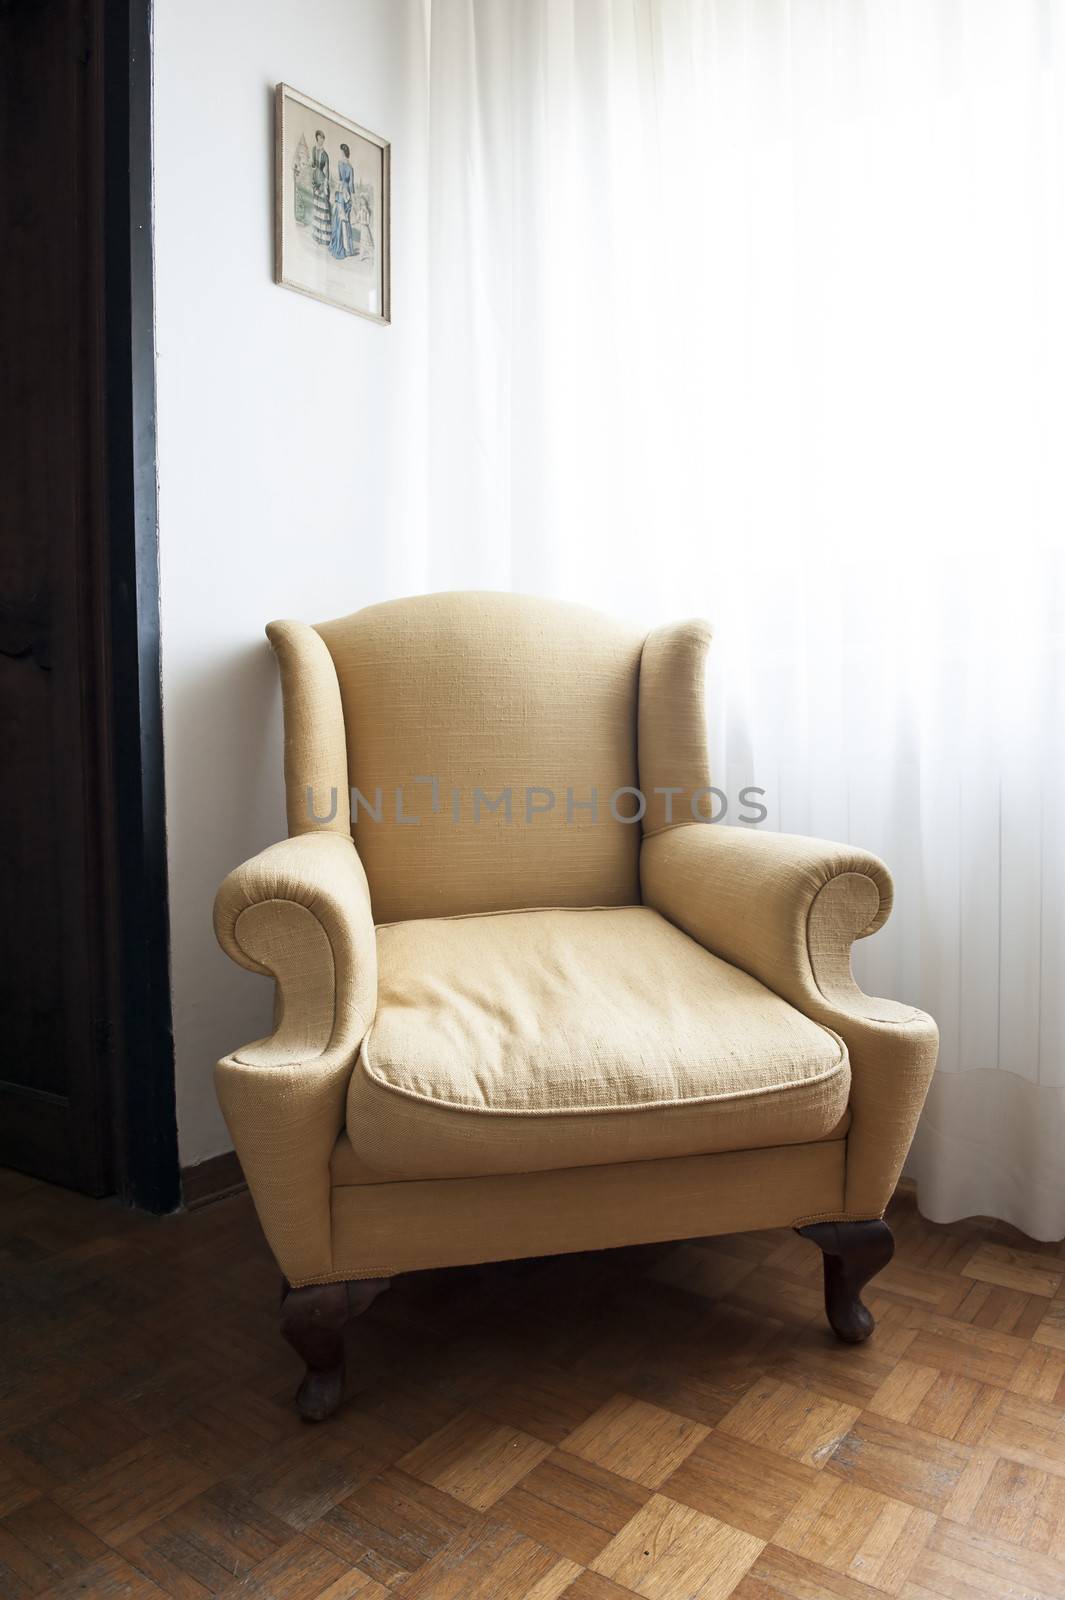 A brown armchair in an old apartment with wooden floor